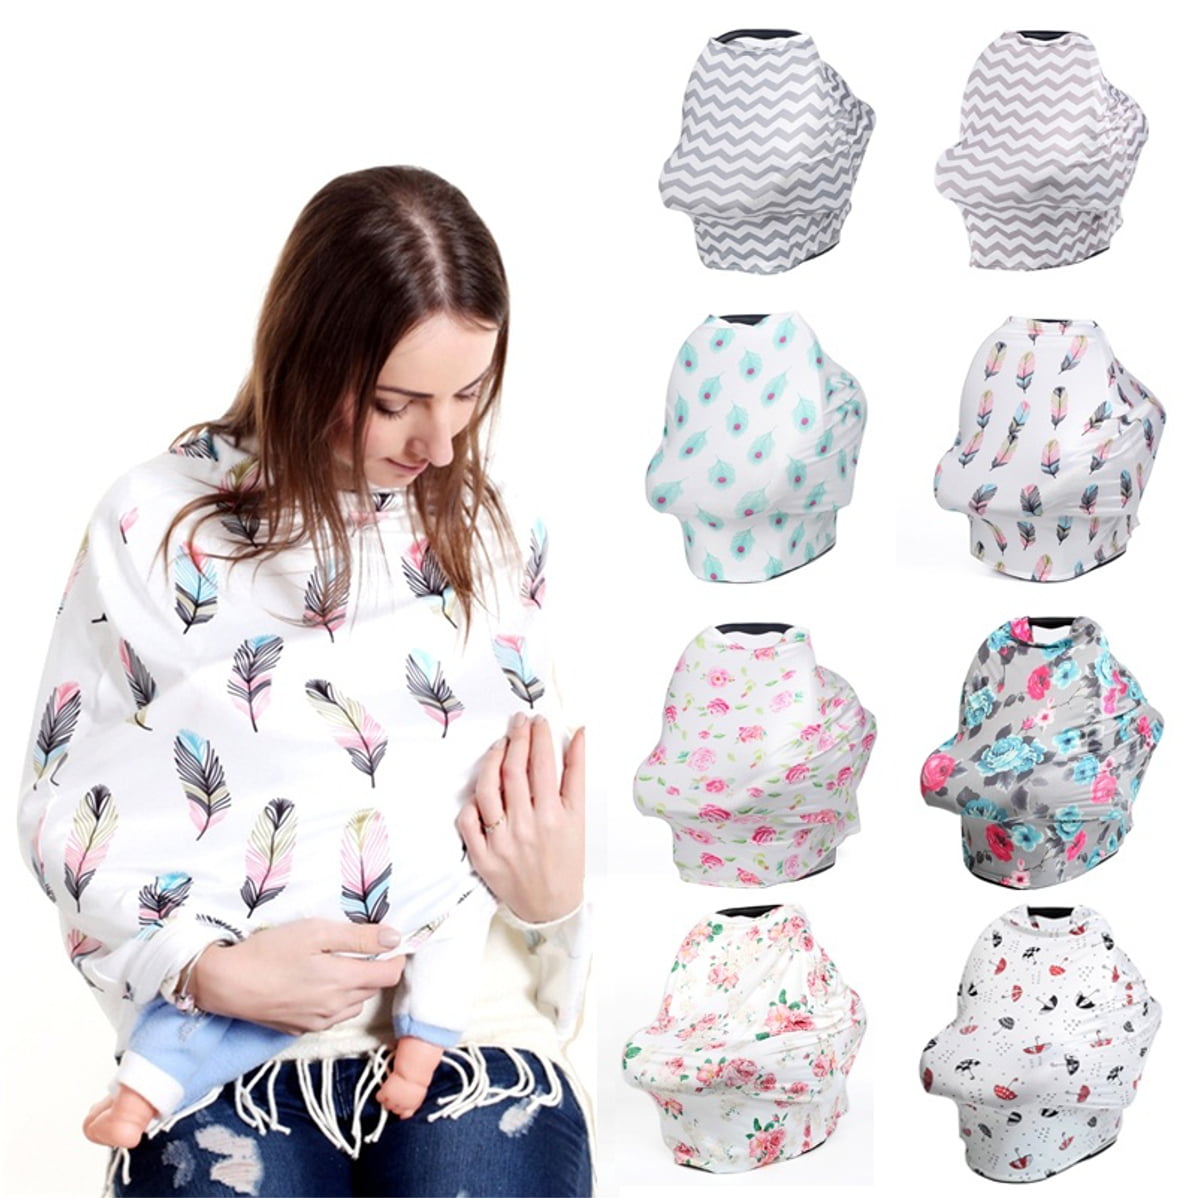 Stretchy Baby Car Seat Cover Canopy Nursing/Breastfeeding Cover Infinity Scarf 